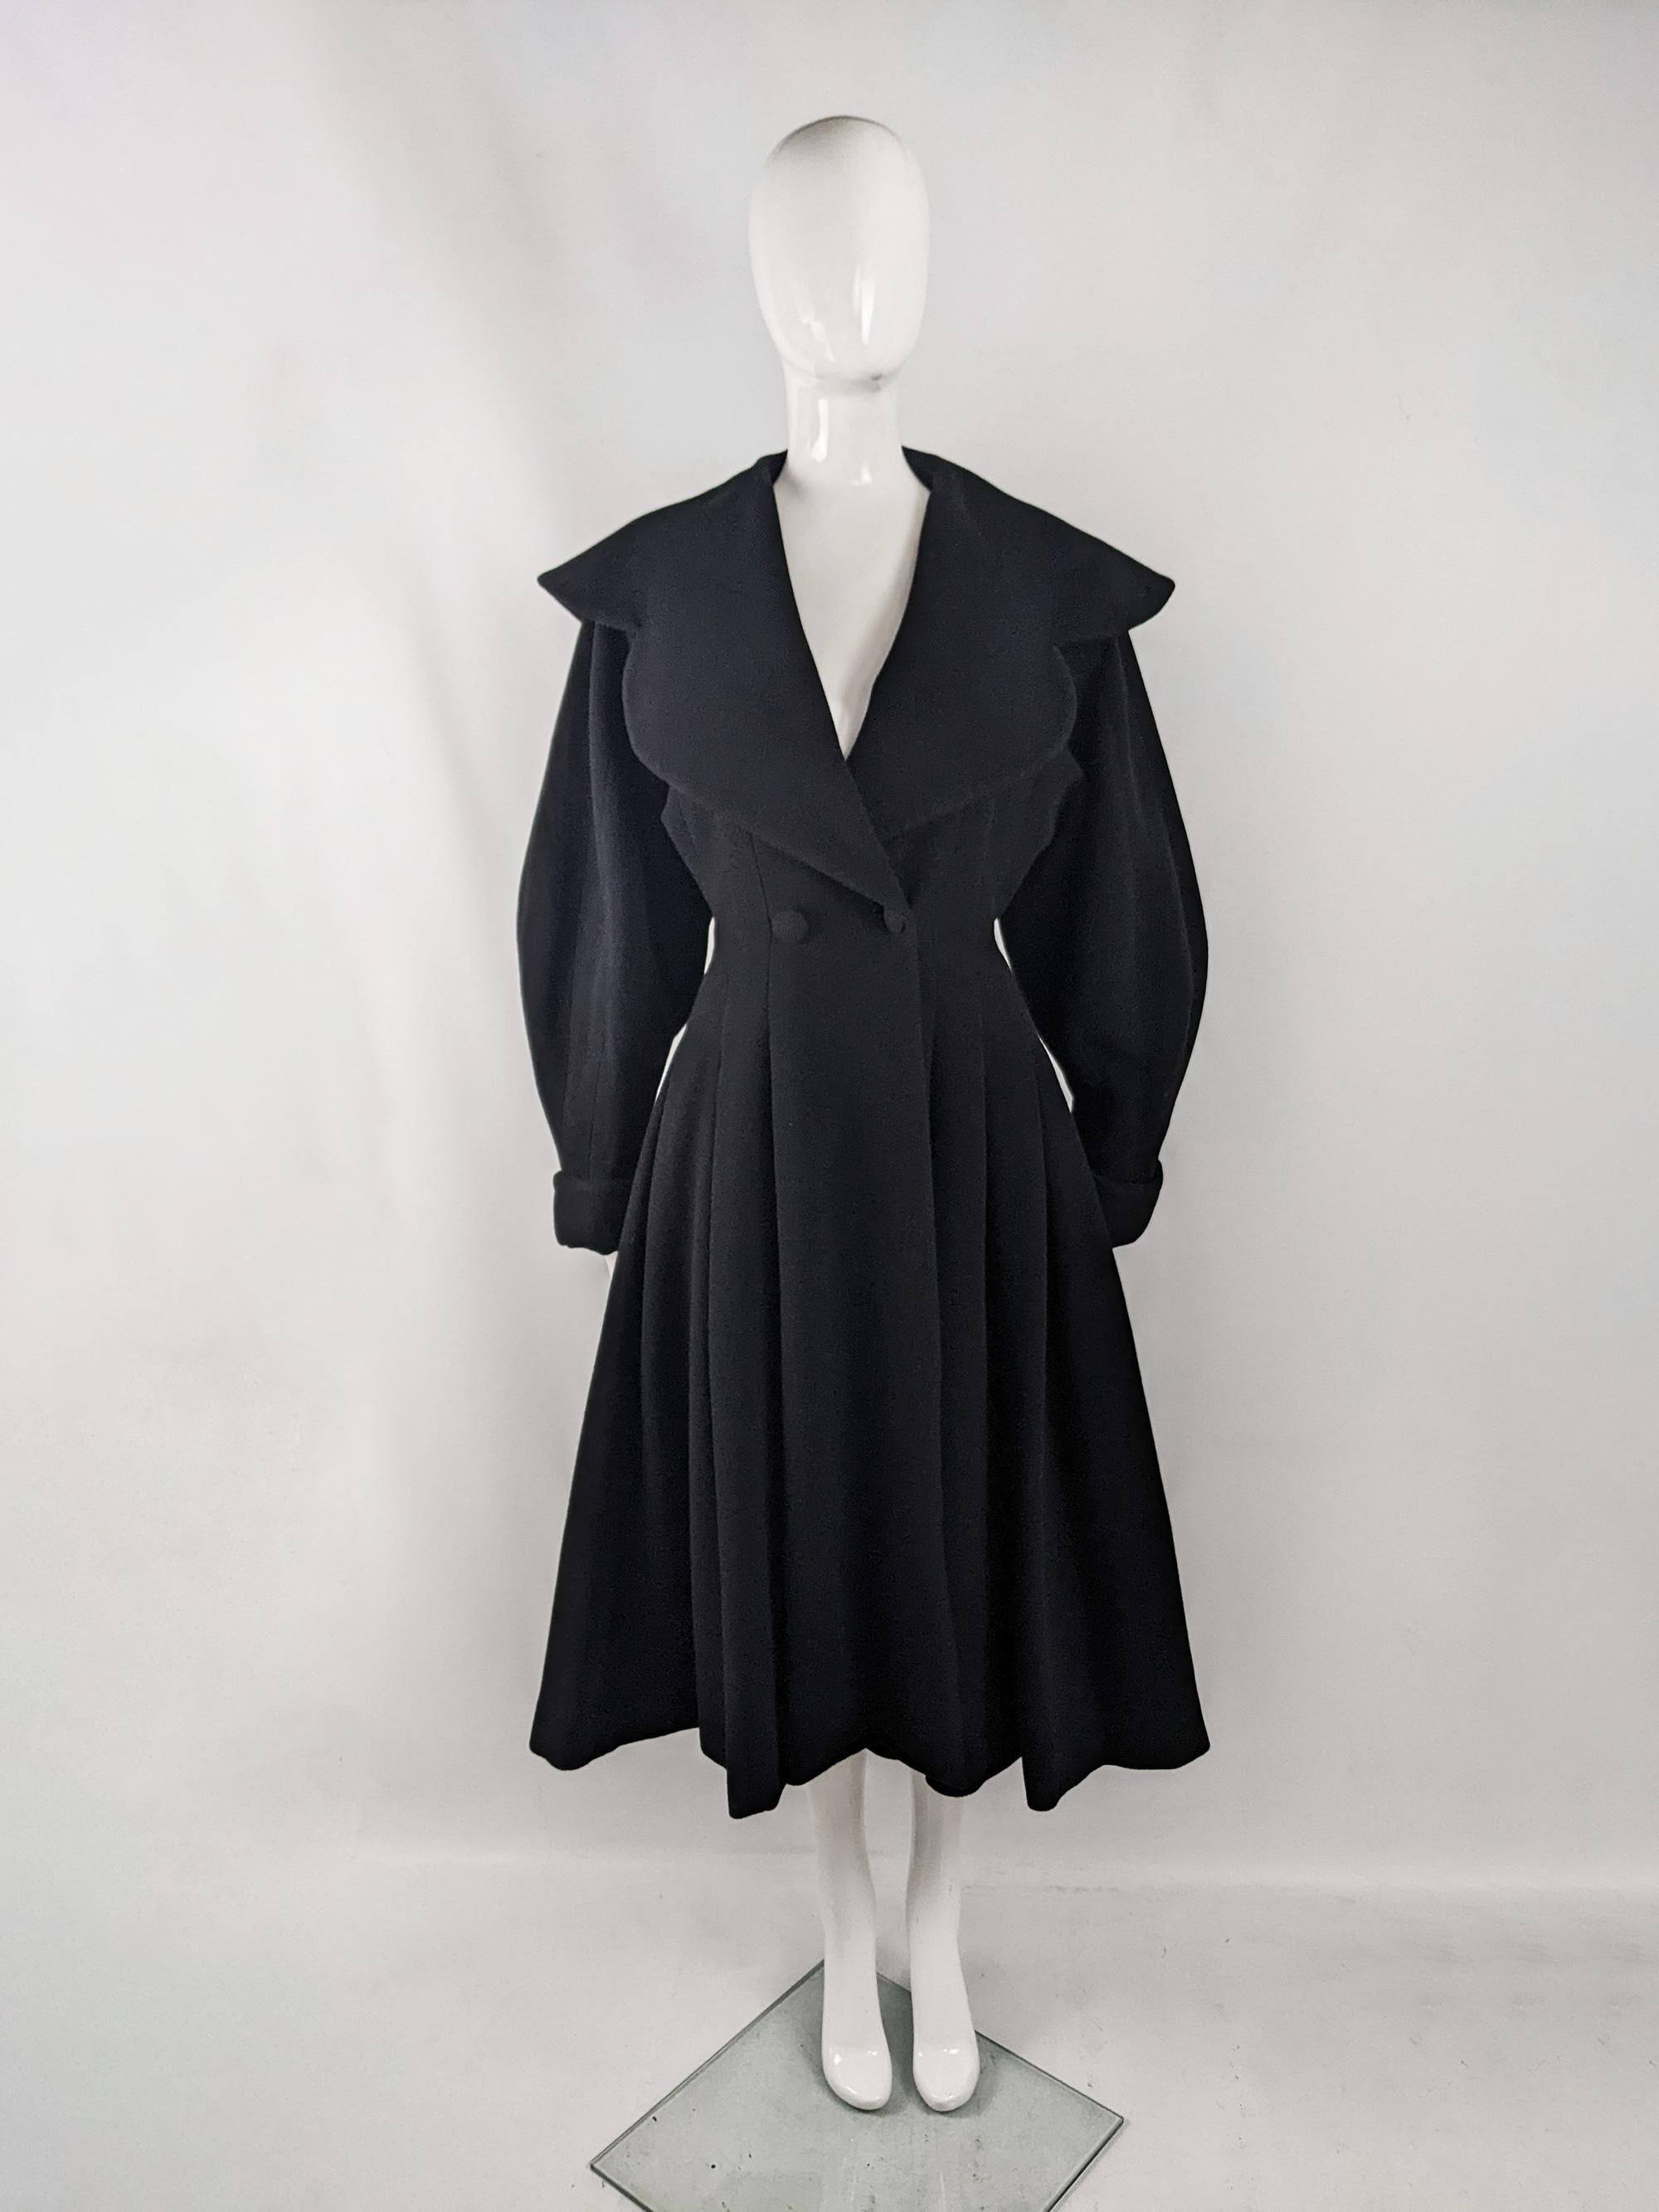 An absolutely incredible vintage womens coat from the 80s by luxury British fashion house, Joseph. Excellently constructed, made in France from a heavy black pure virgin wool fabric, which makes it perfect for autumn and winter. It has an amazing